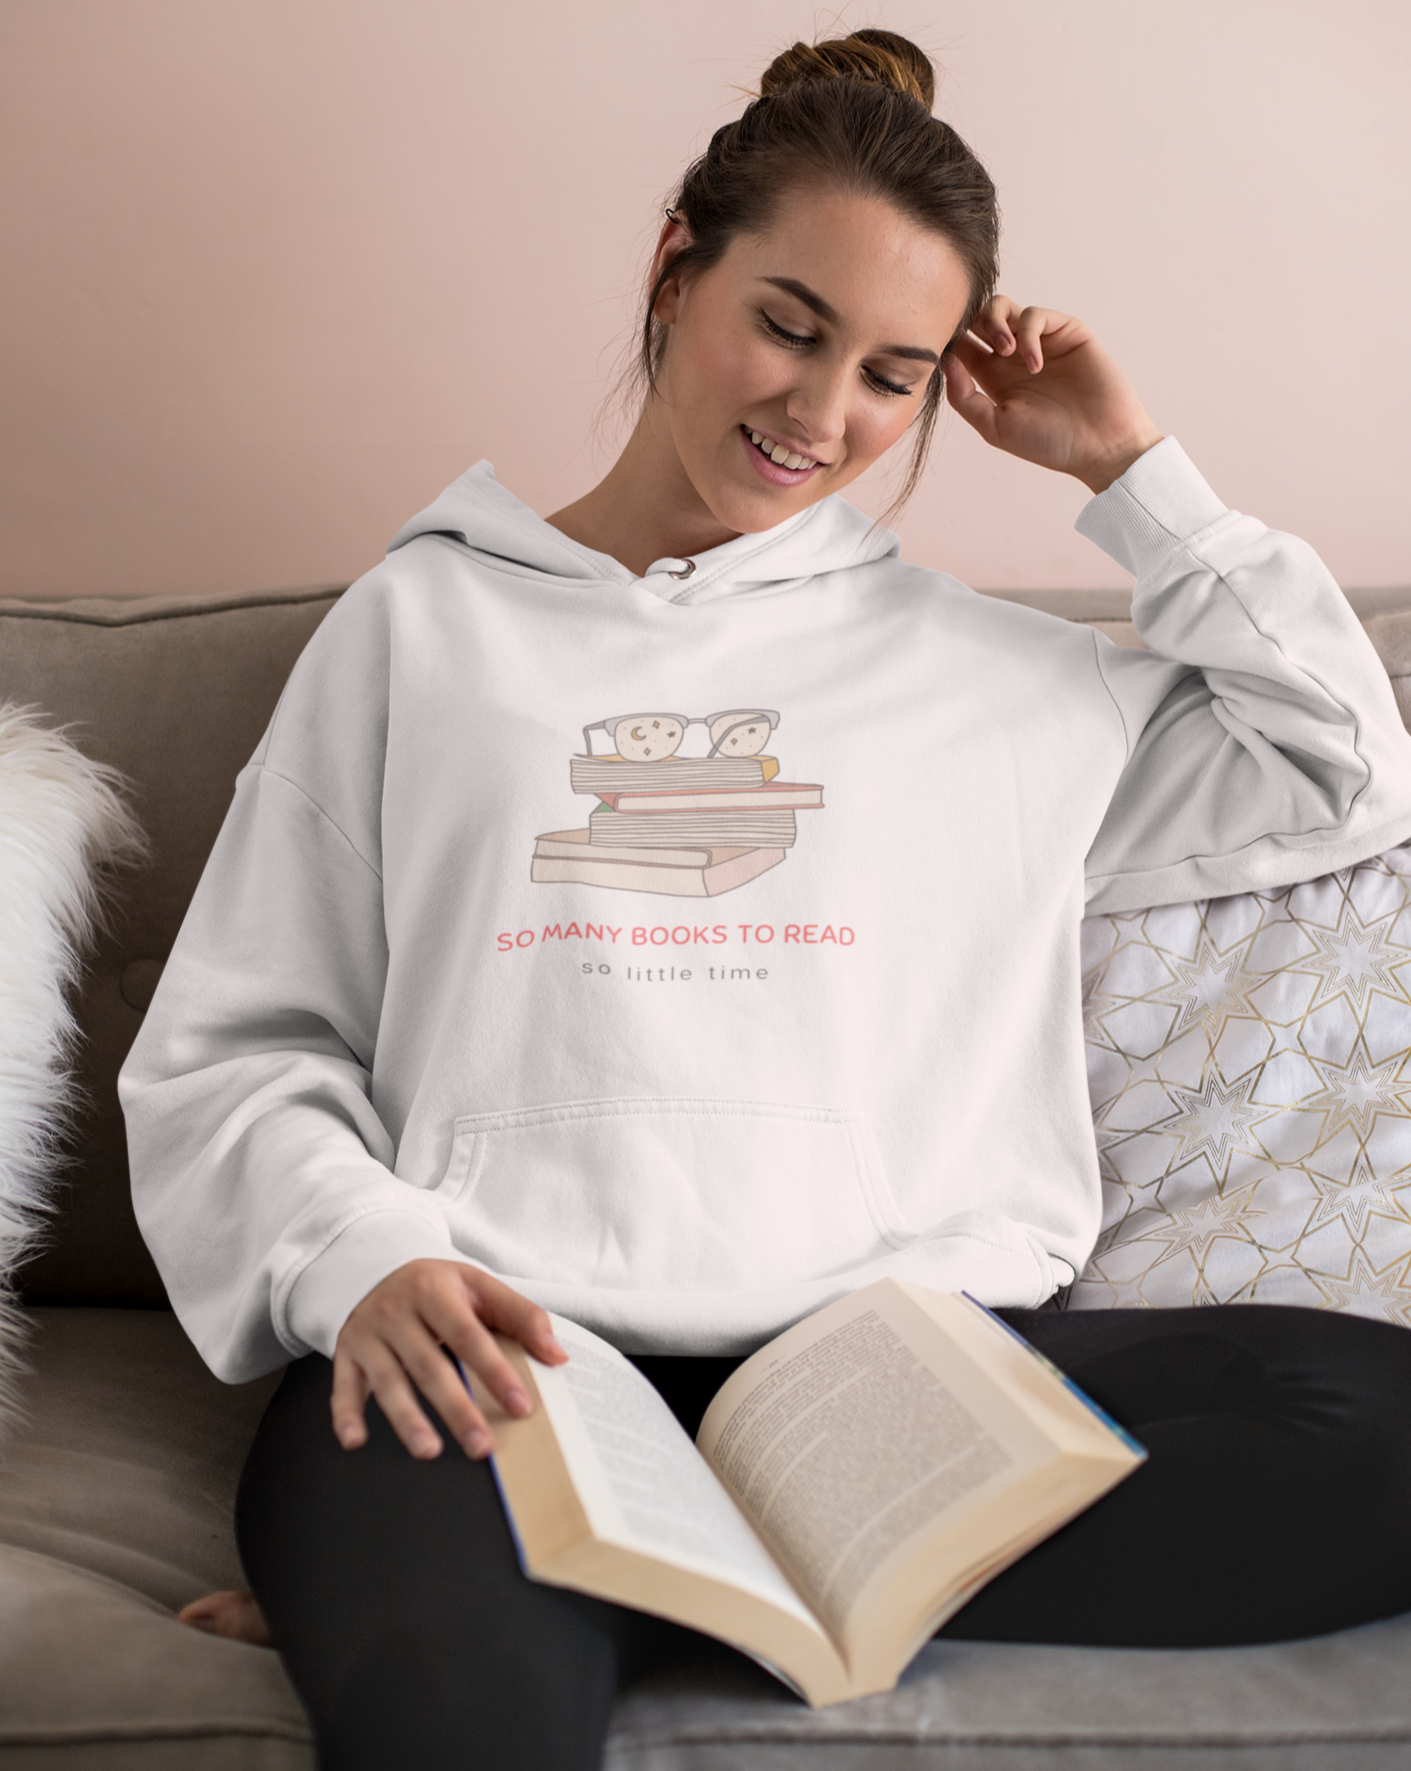 To all the book lovers out there, this hoodie is for you! Inspired by bookworms everywhere, this cotton t-shirt has a cute book design with the phrase “So Many Books To Read So Little Time”. Made with a super soft cotton, this stylish sweatshirt is great for snuggling up on the couch with a new book in hand. This is a great gift idea for your bookclub or anyone who is a reader.